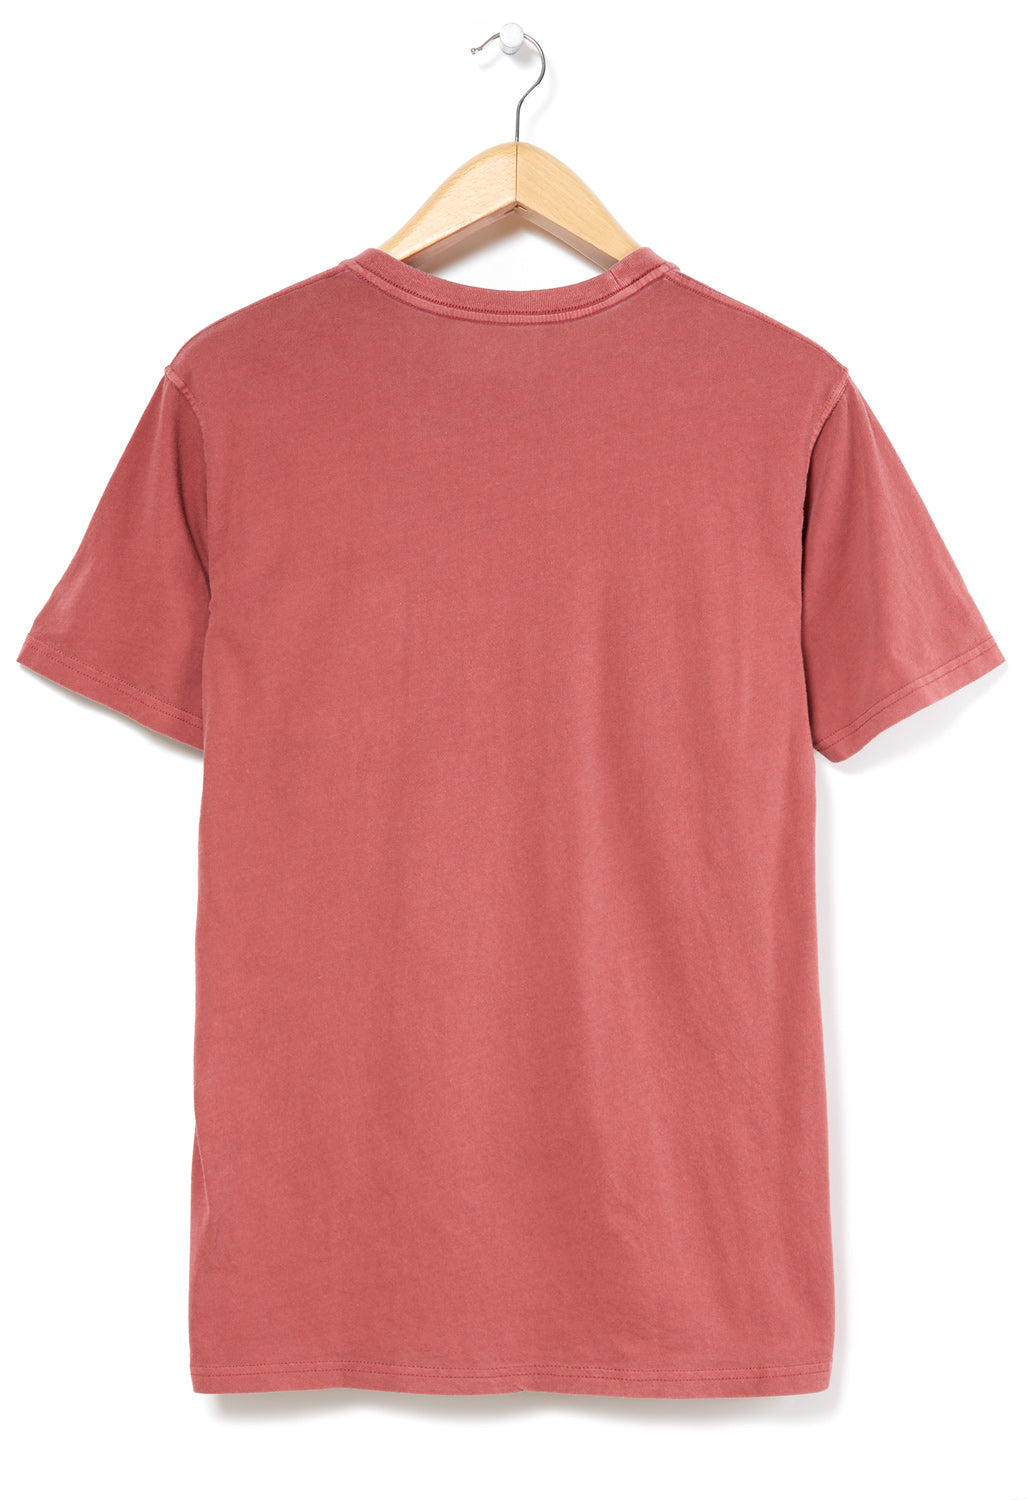 Montbell Men's Wash Out Cotton T-Shirt - Red